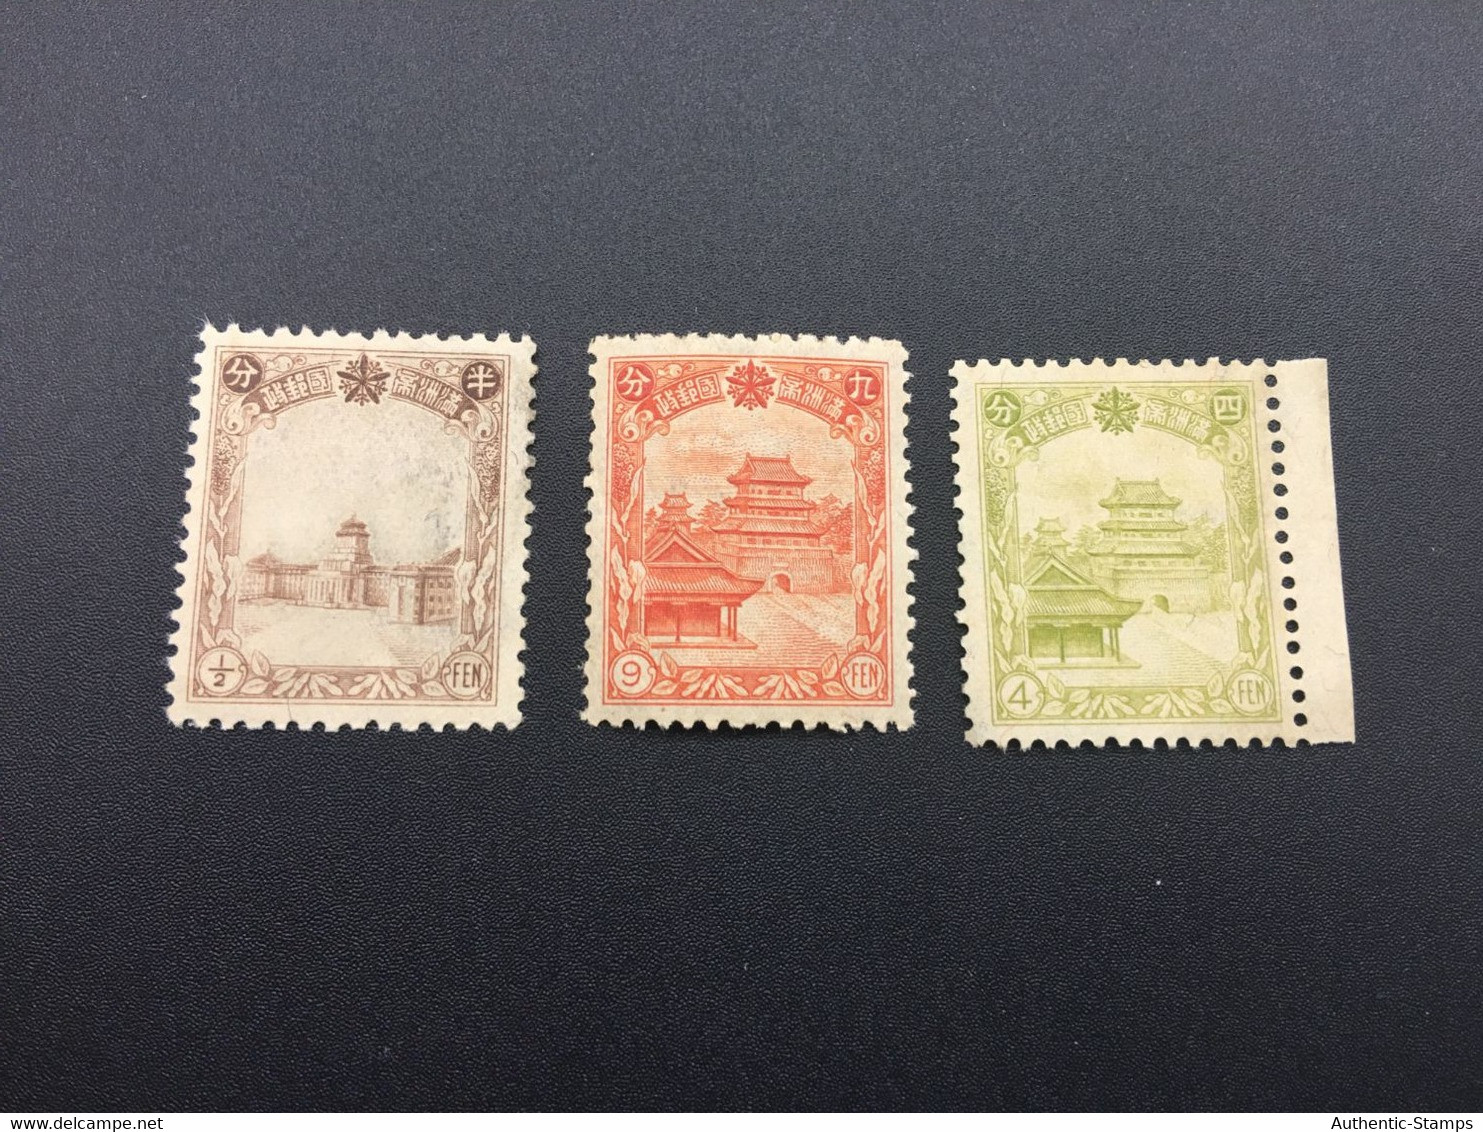 CHINA STAMP,  TIMBRO, STEMPEL,  CINA, CHINE, LIST 8276 - 1932-45 Mandchourie (Mandchoukouo)